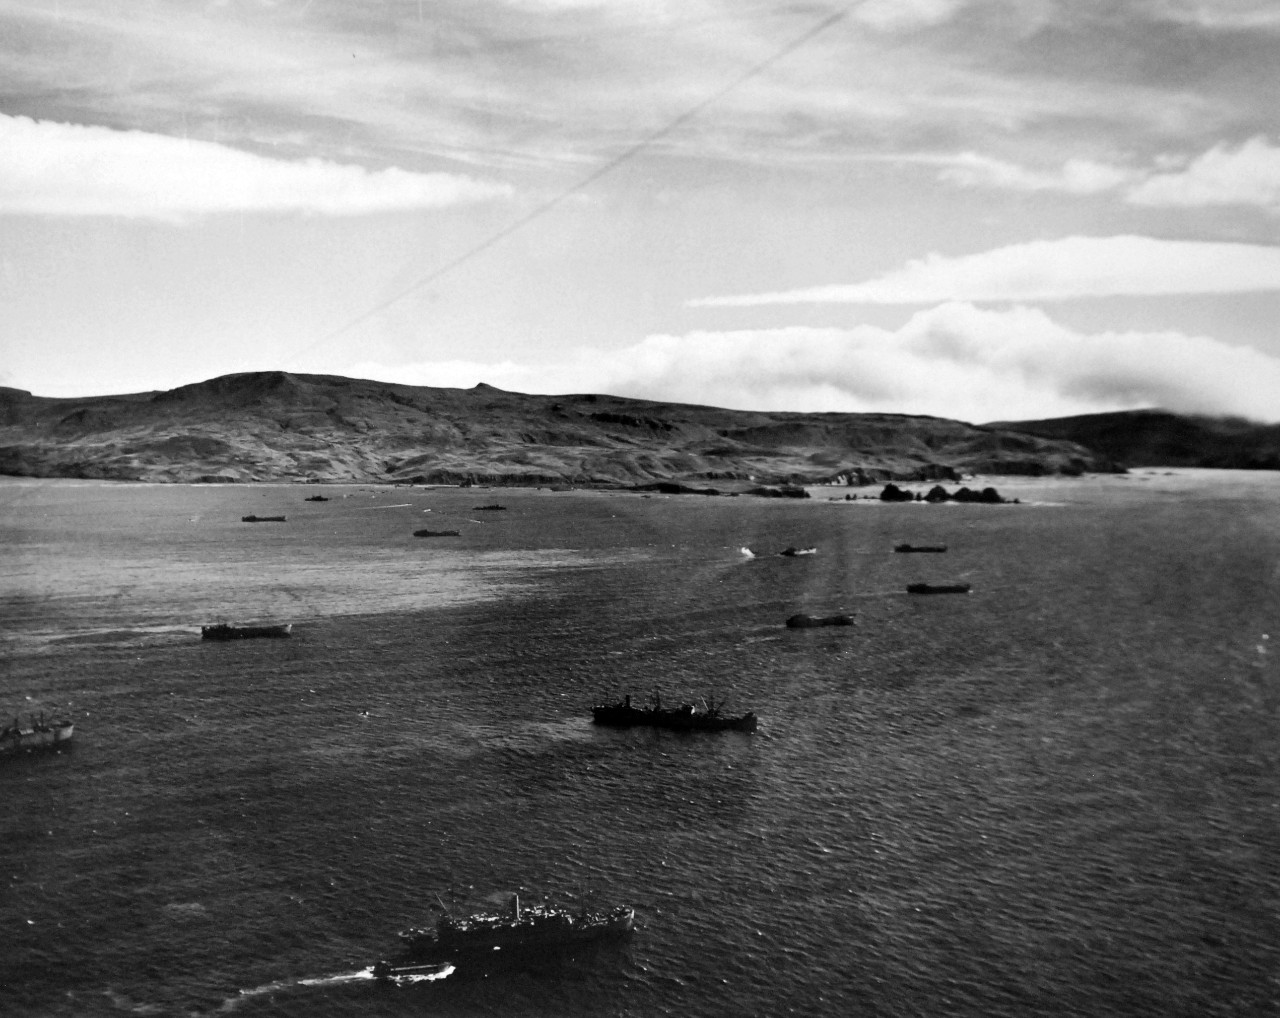 LC-Lot-803-16:  Aleutian Islands Campaign, June 1942 - August 1943.   Allied Invasion of Kiska, August 15-24, August 1943. Landing craft, carrying American and Canadian invasion troops, move in toward Kiska’s rocky north shoreline, as U.S. Navy transports wait offshore (foreground). U.S. Navy photograph, released August 24, 1943.  Photographed through Mylar sleeve. Courtesy of the Library of Congress.  (2015/11/06).